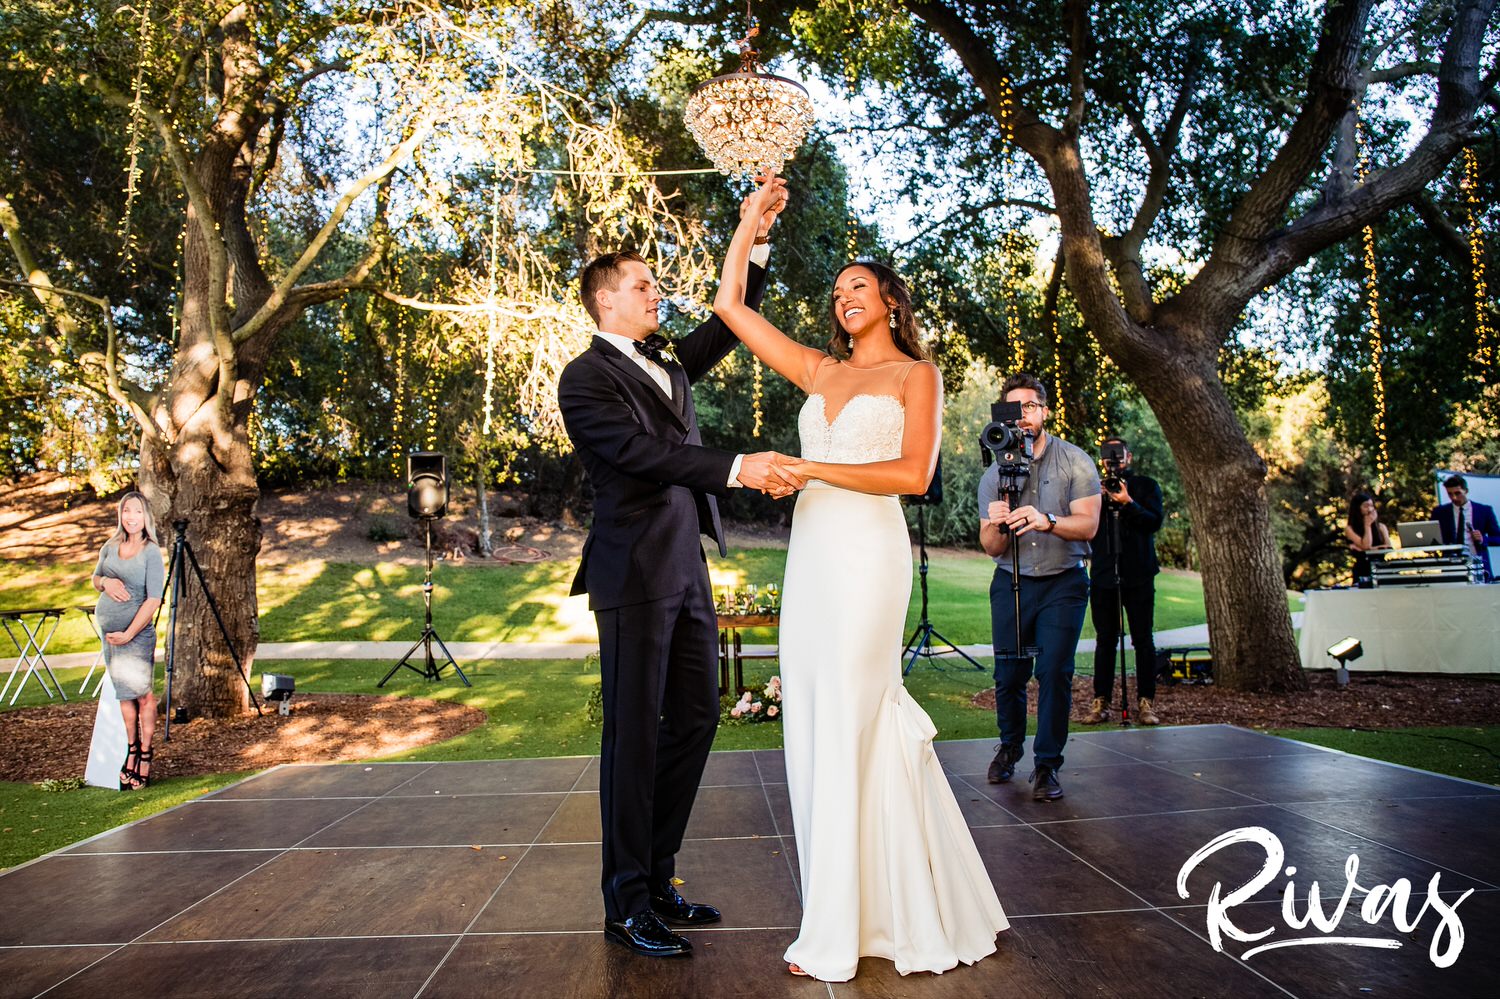 Saddlerock Ranch Summer Wedding | Destination Wedding Photographers | Rivas | A candid picture of a groom twirling his bride as they share their first dance on the dance floor of the wedding reception at Malibu's Saddlerock Ranch. 